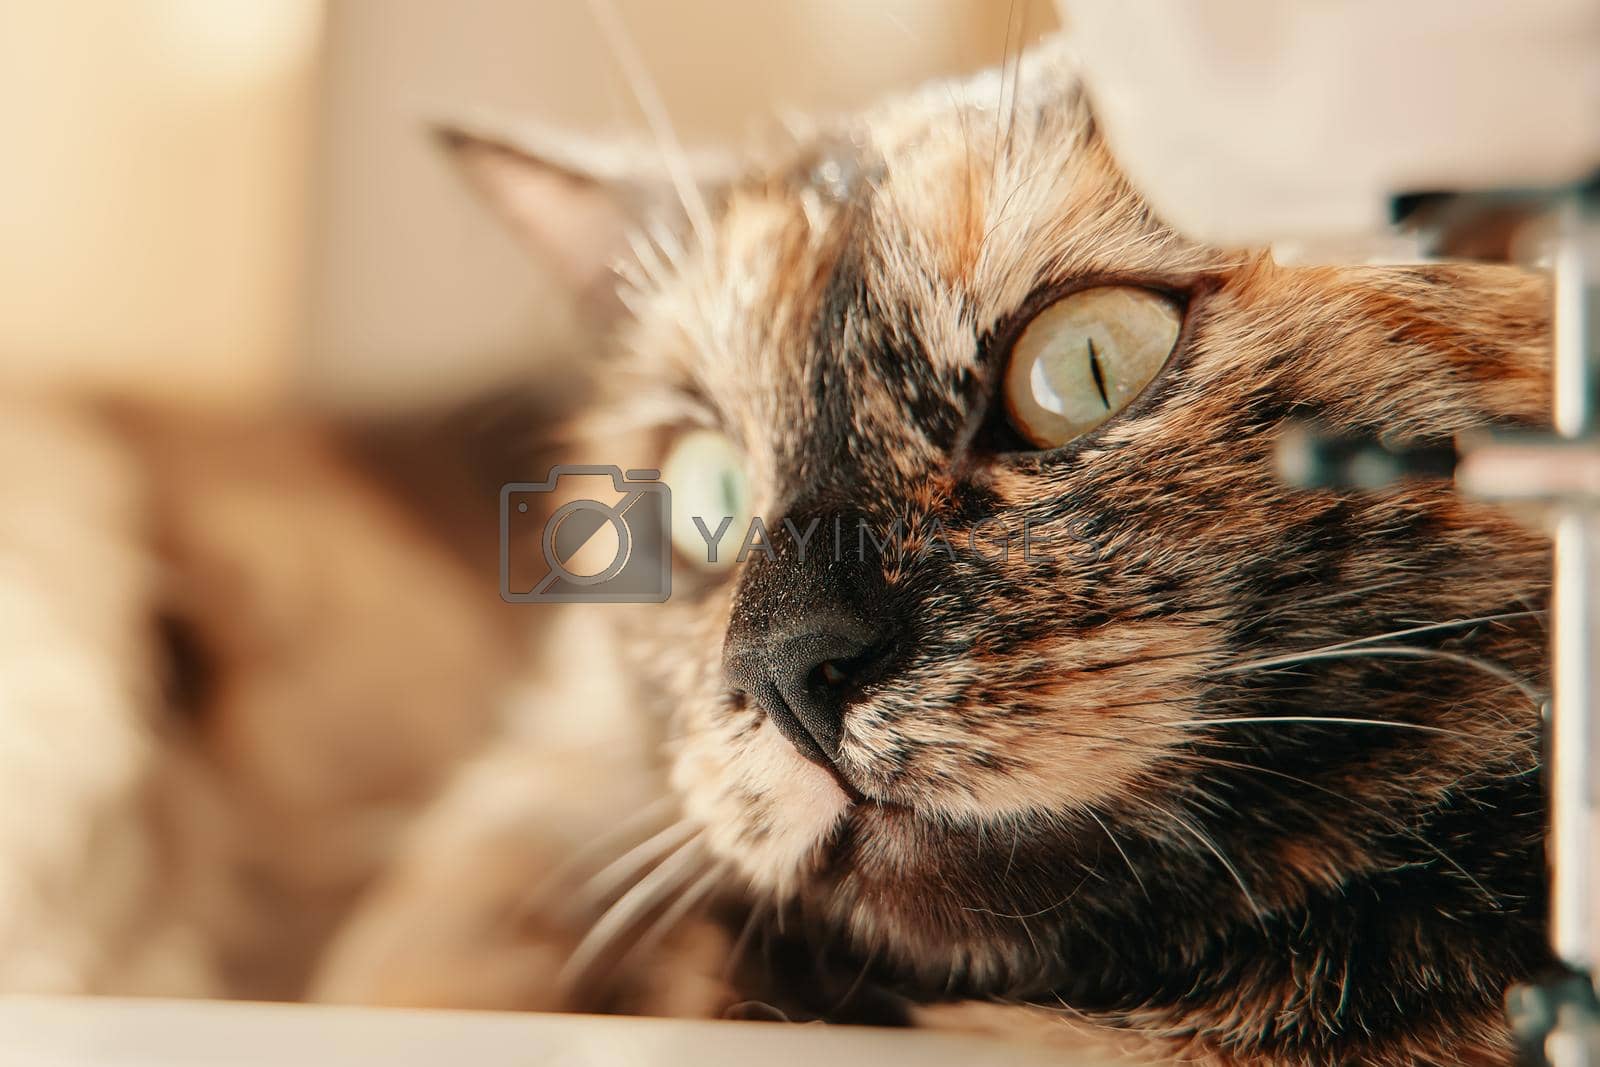 Curious multicolored pussycat is lying on desktop. Cute kitten with yellow eyes looks away. Fluffy cat peeks out from behind object. Pets and lifestyle concept. Domestic animal themes.